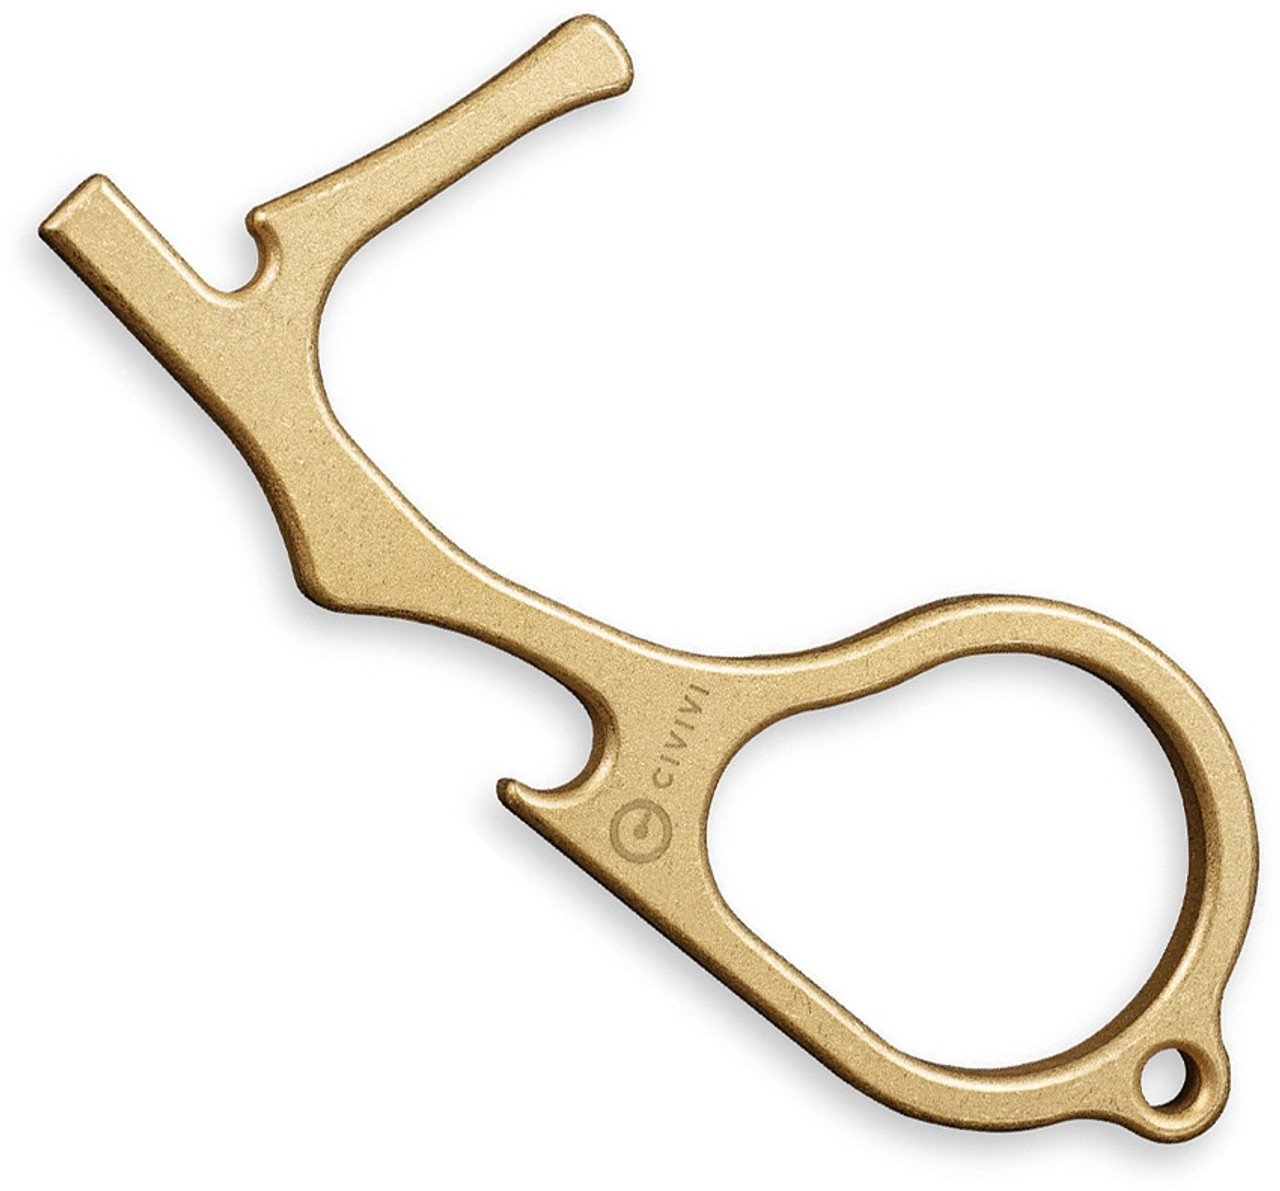 CIVIVI MT-1 Multi-Tool (CA-02A)- 3.54" Brass Contactless Hook Keychain